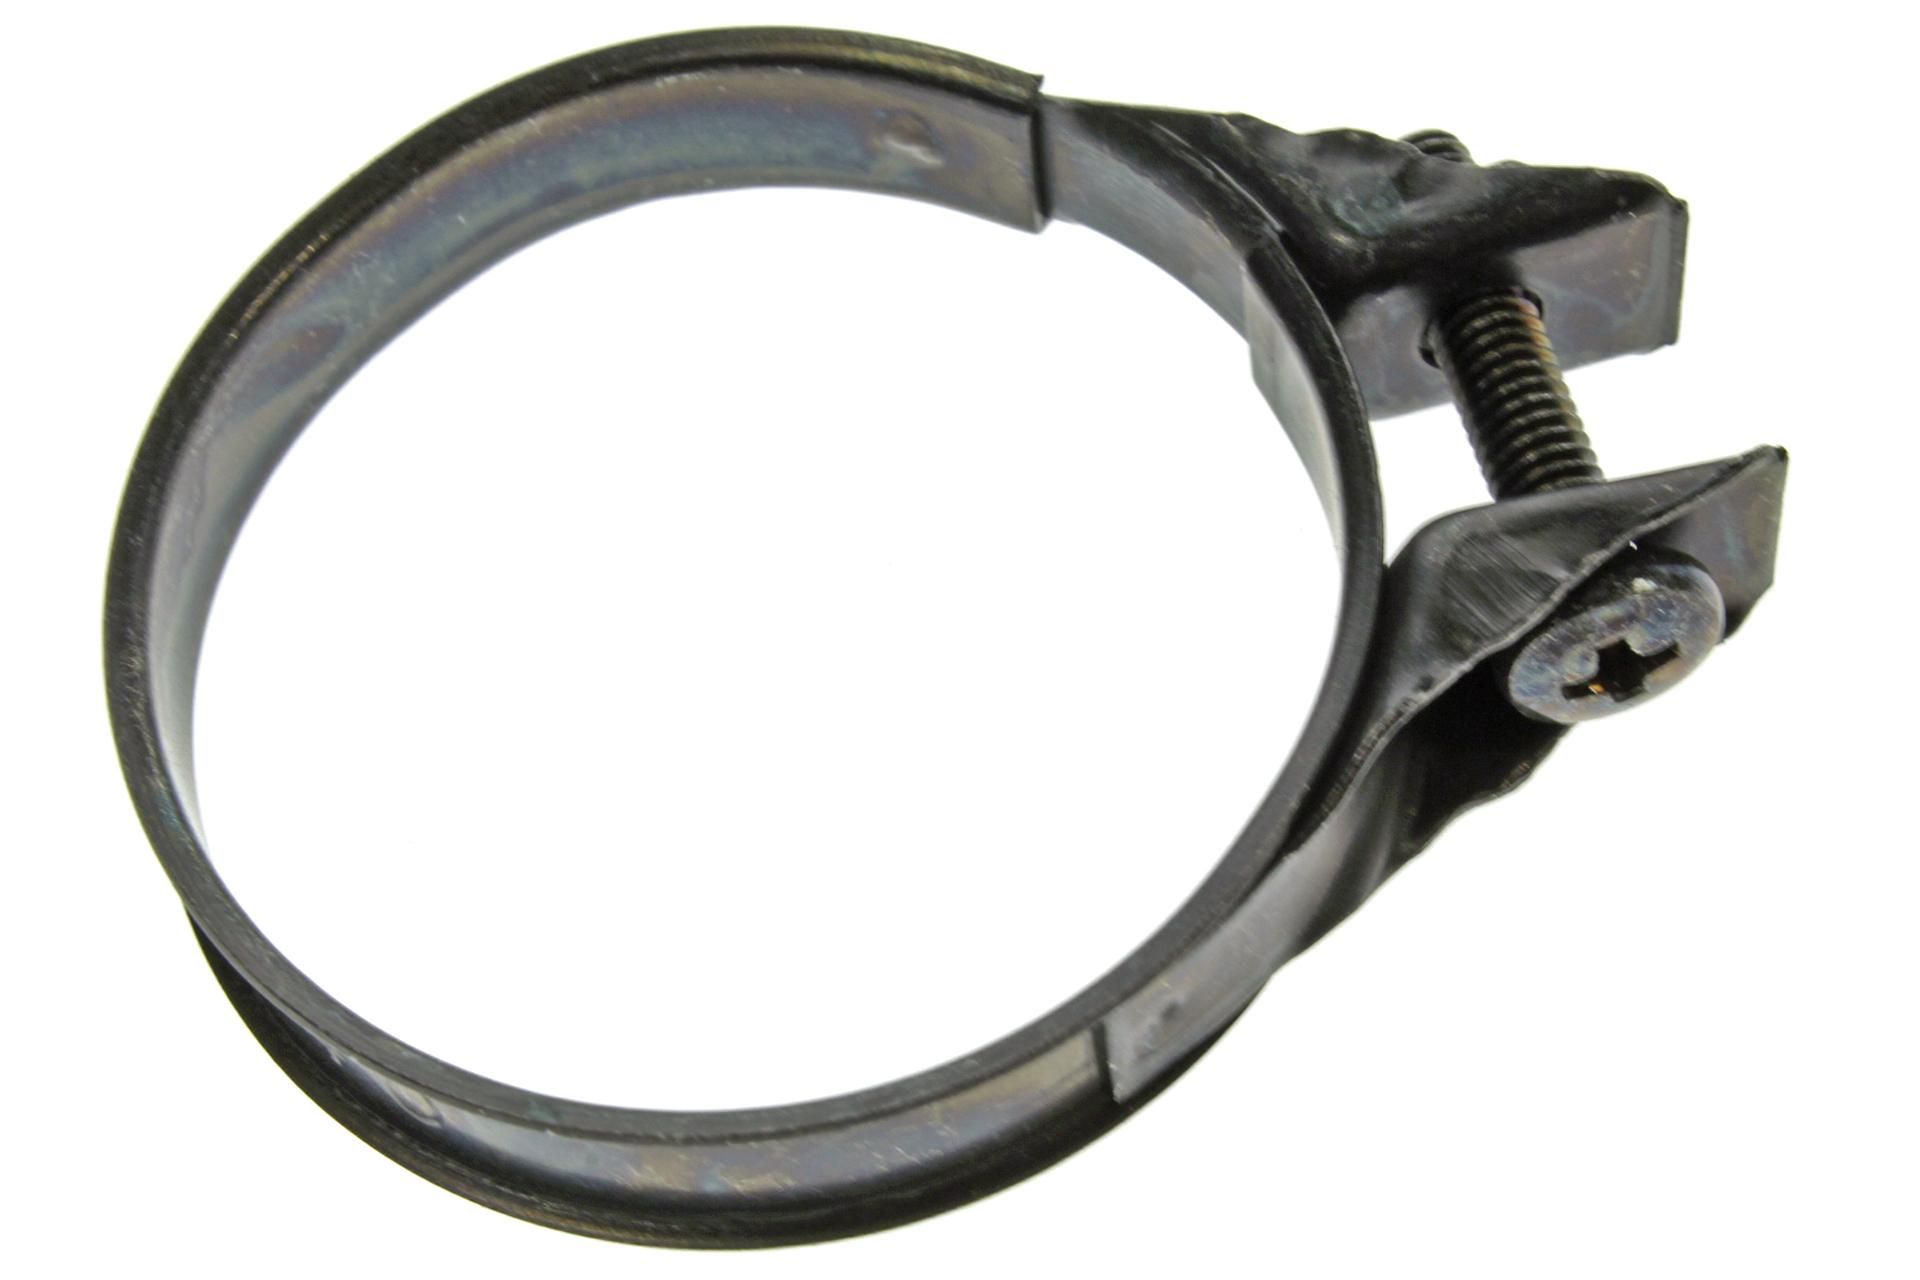 17255-GN1-000 AIR CLEANER TUBE BAND